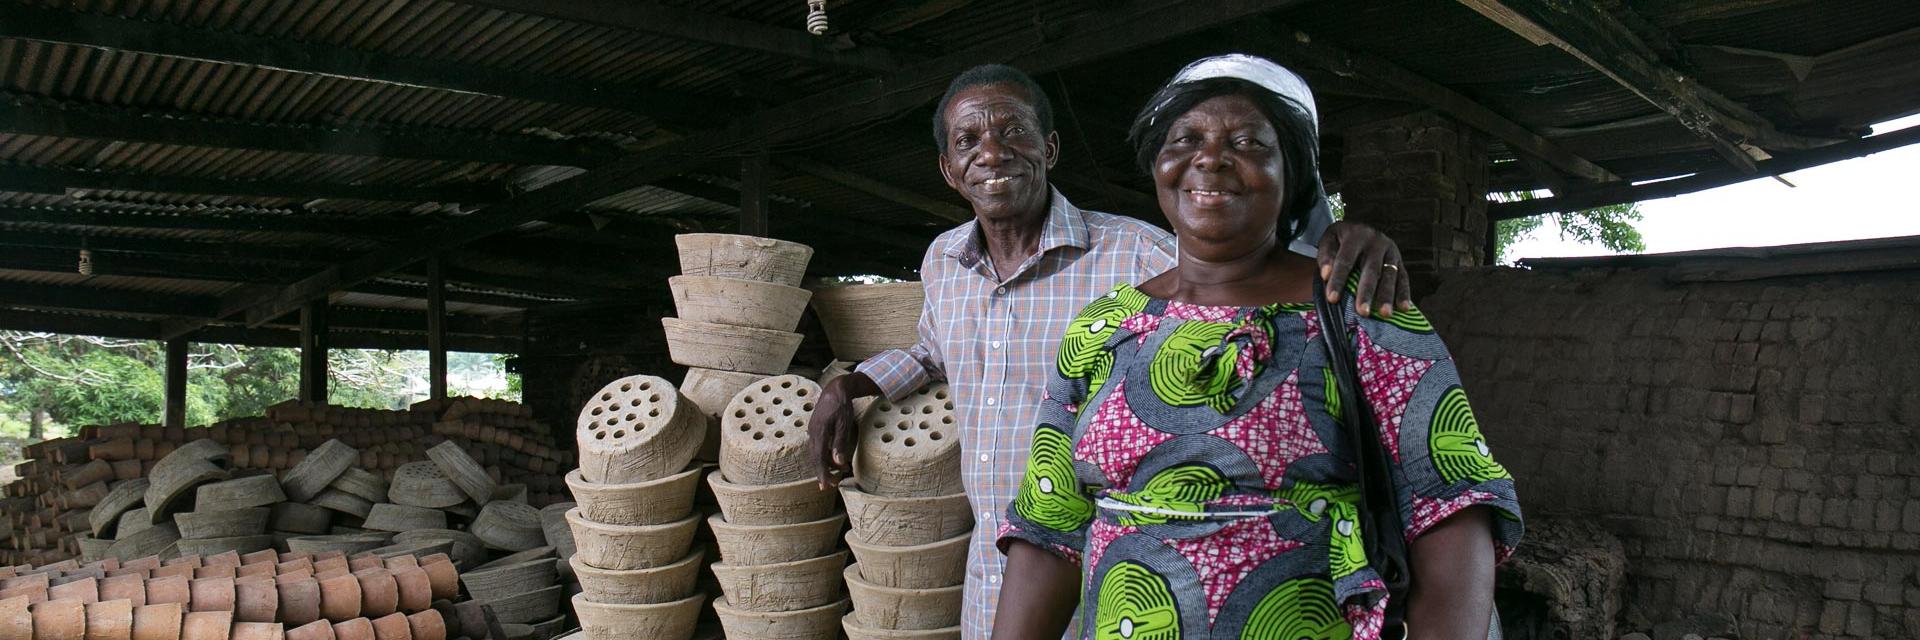 Richard and Gladys Eken standing beside ceramic liners that they make for clean cookstoves.